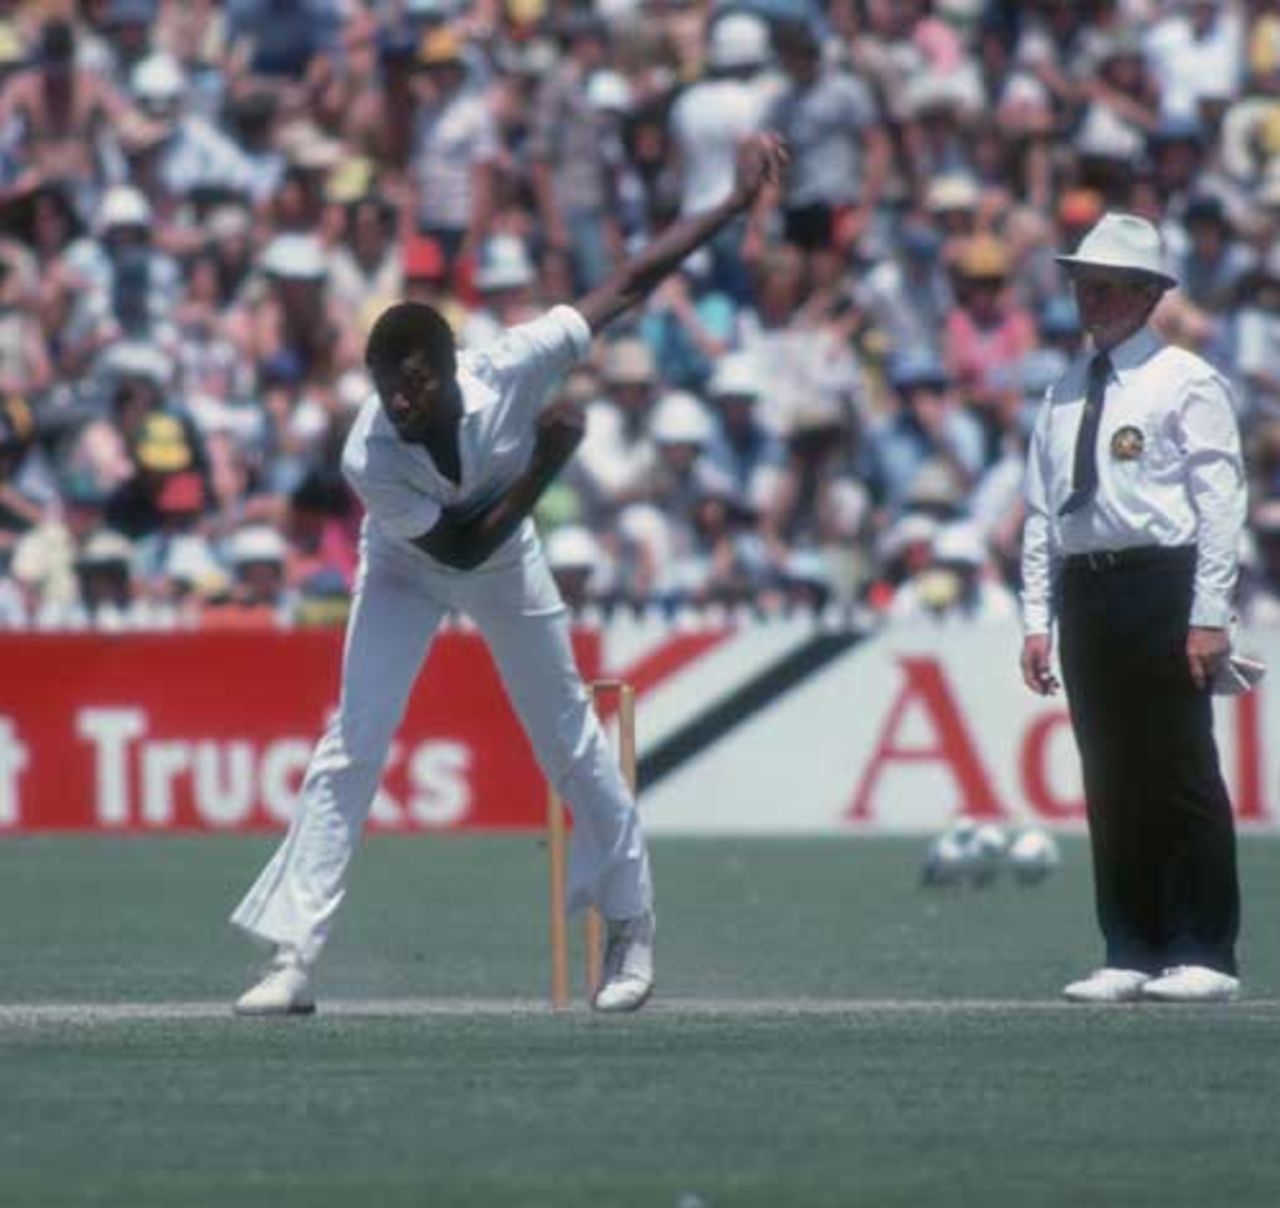 Colin Croft bowls, Australia v West Indies, third Test, Adelaide, 26th-30th January 1980. 